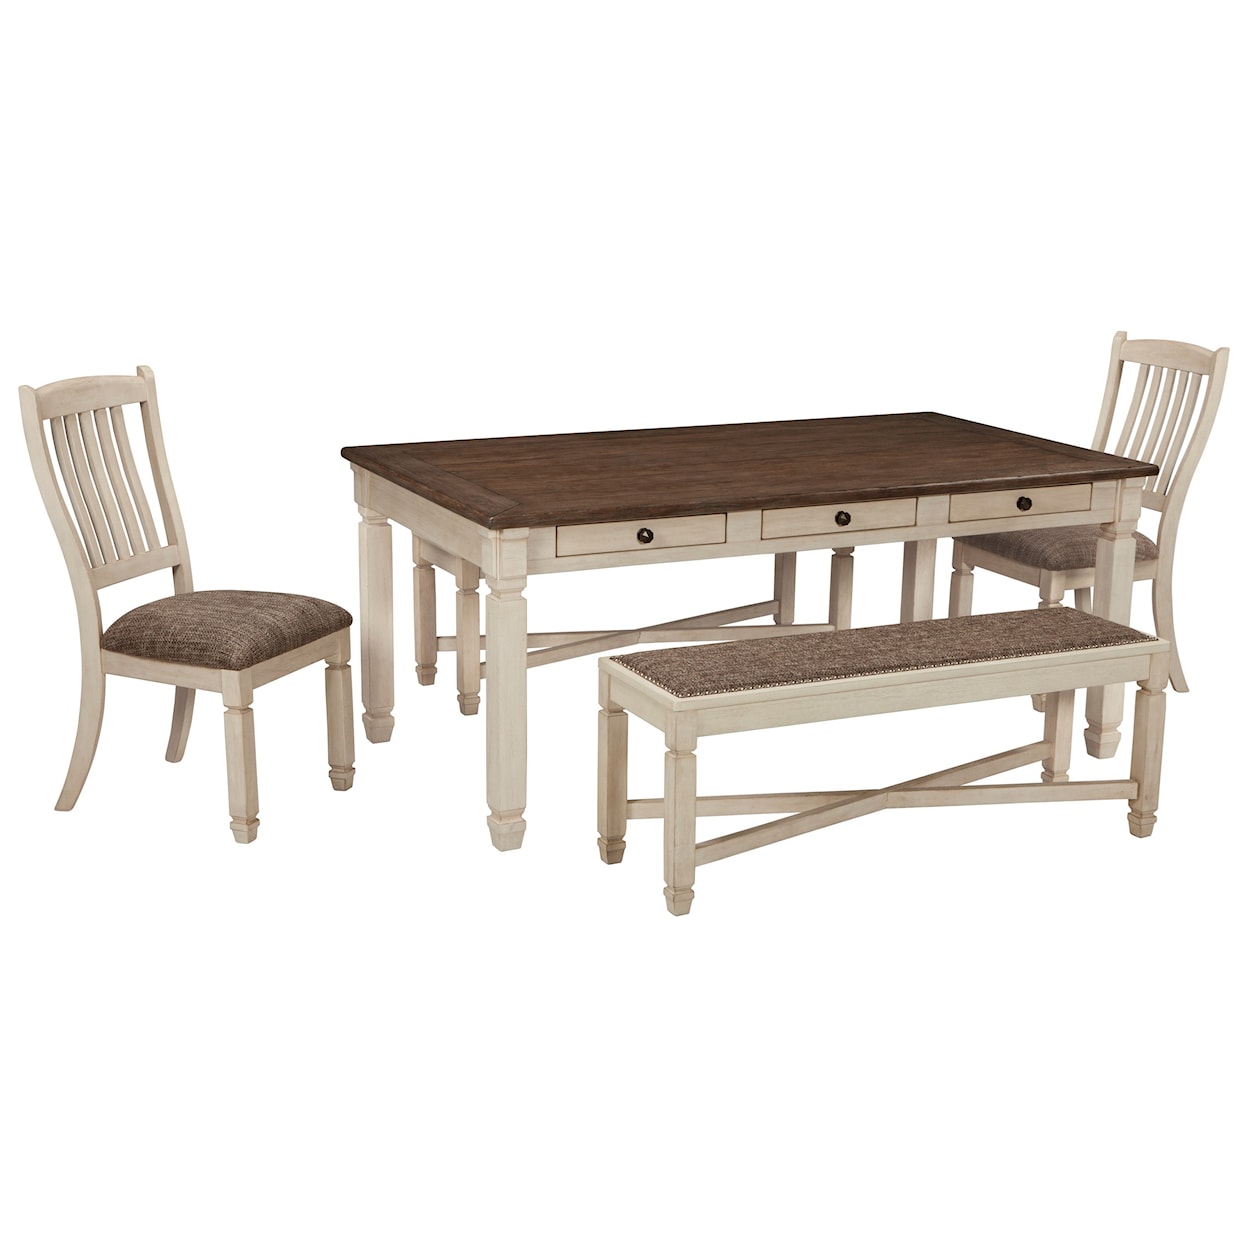 Ashley Furniture Signature Design Bolanburg Table and Chair Set with Bench